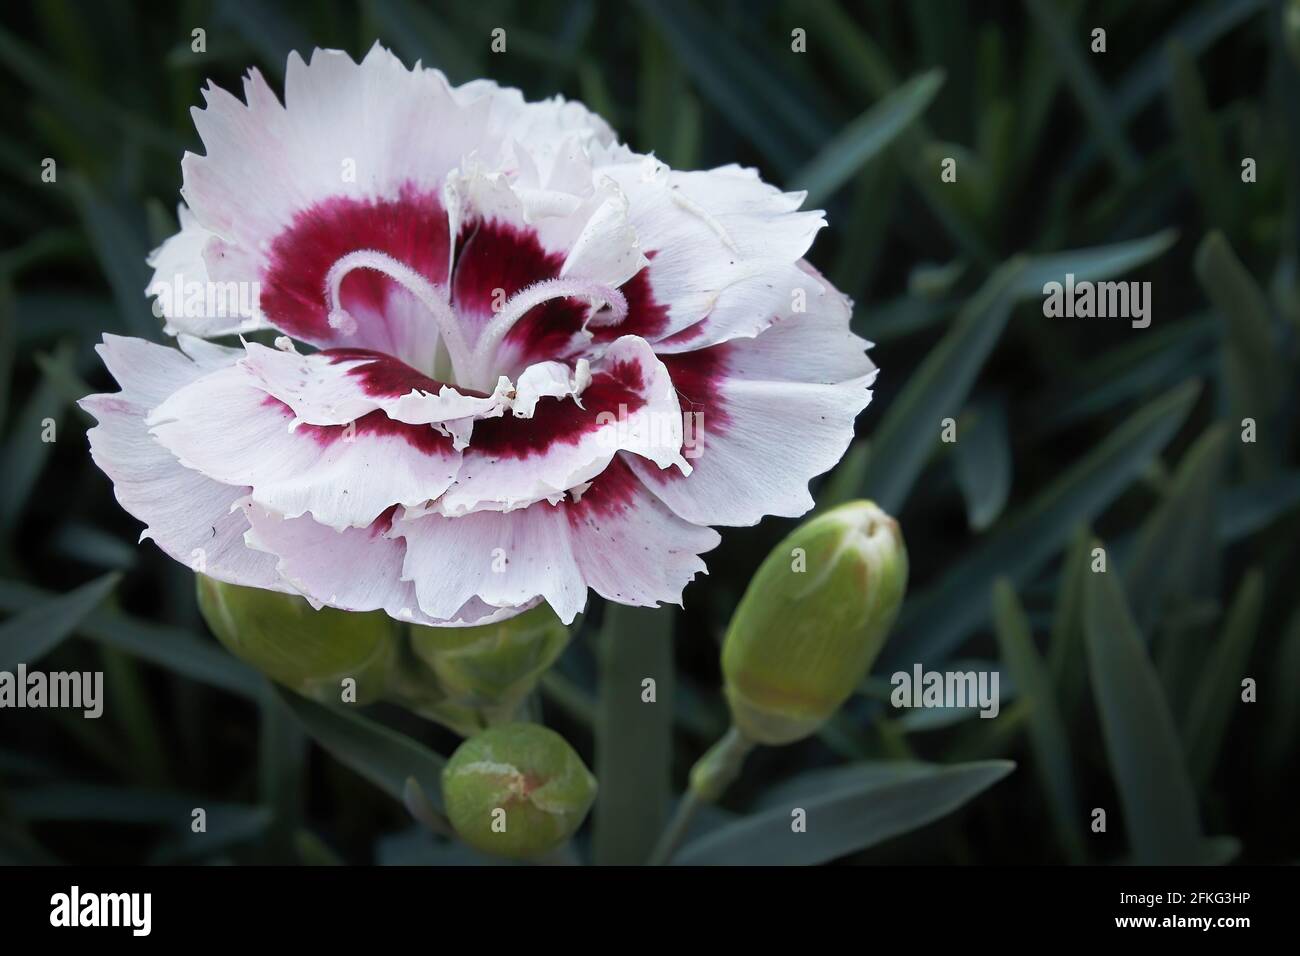 Closeup of a red and white dianthus flower in bloom Stock Photo